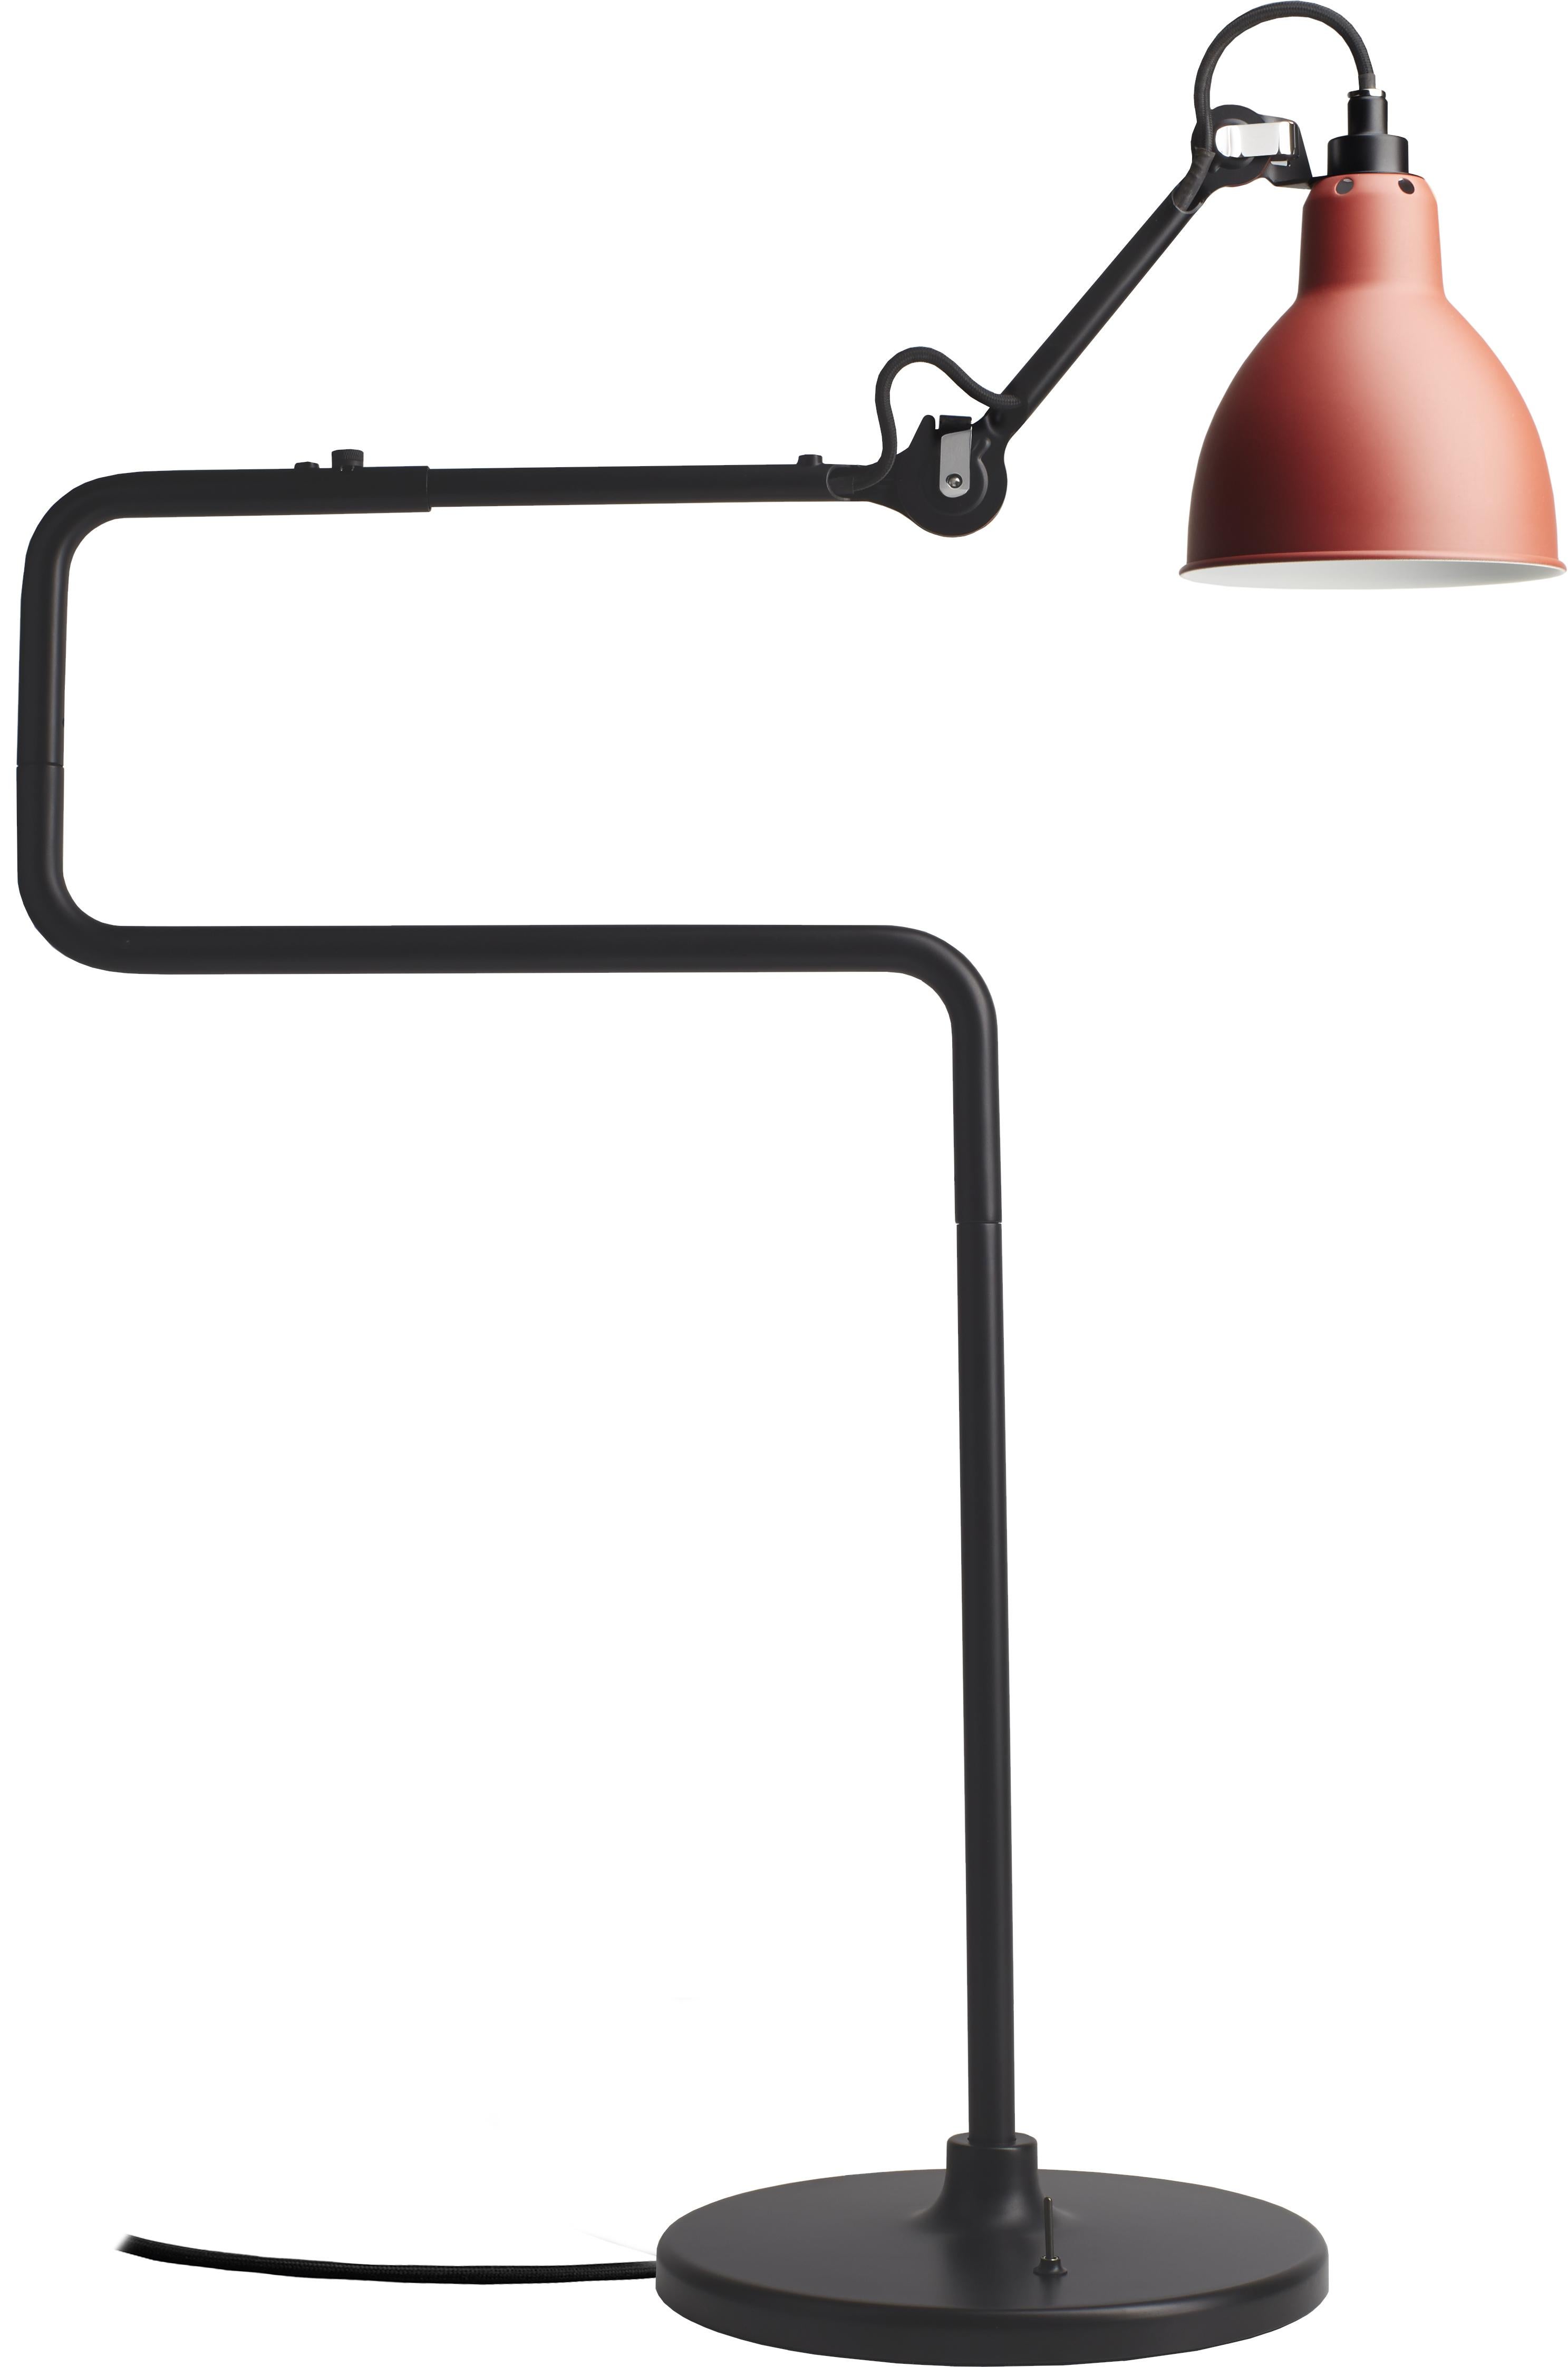 DCW Editions La Lampe Gras N°317 Table Lamp in Black Arm with Red Shade For Sale